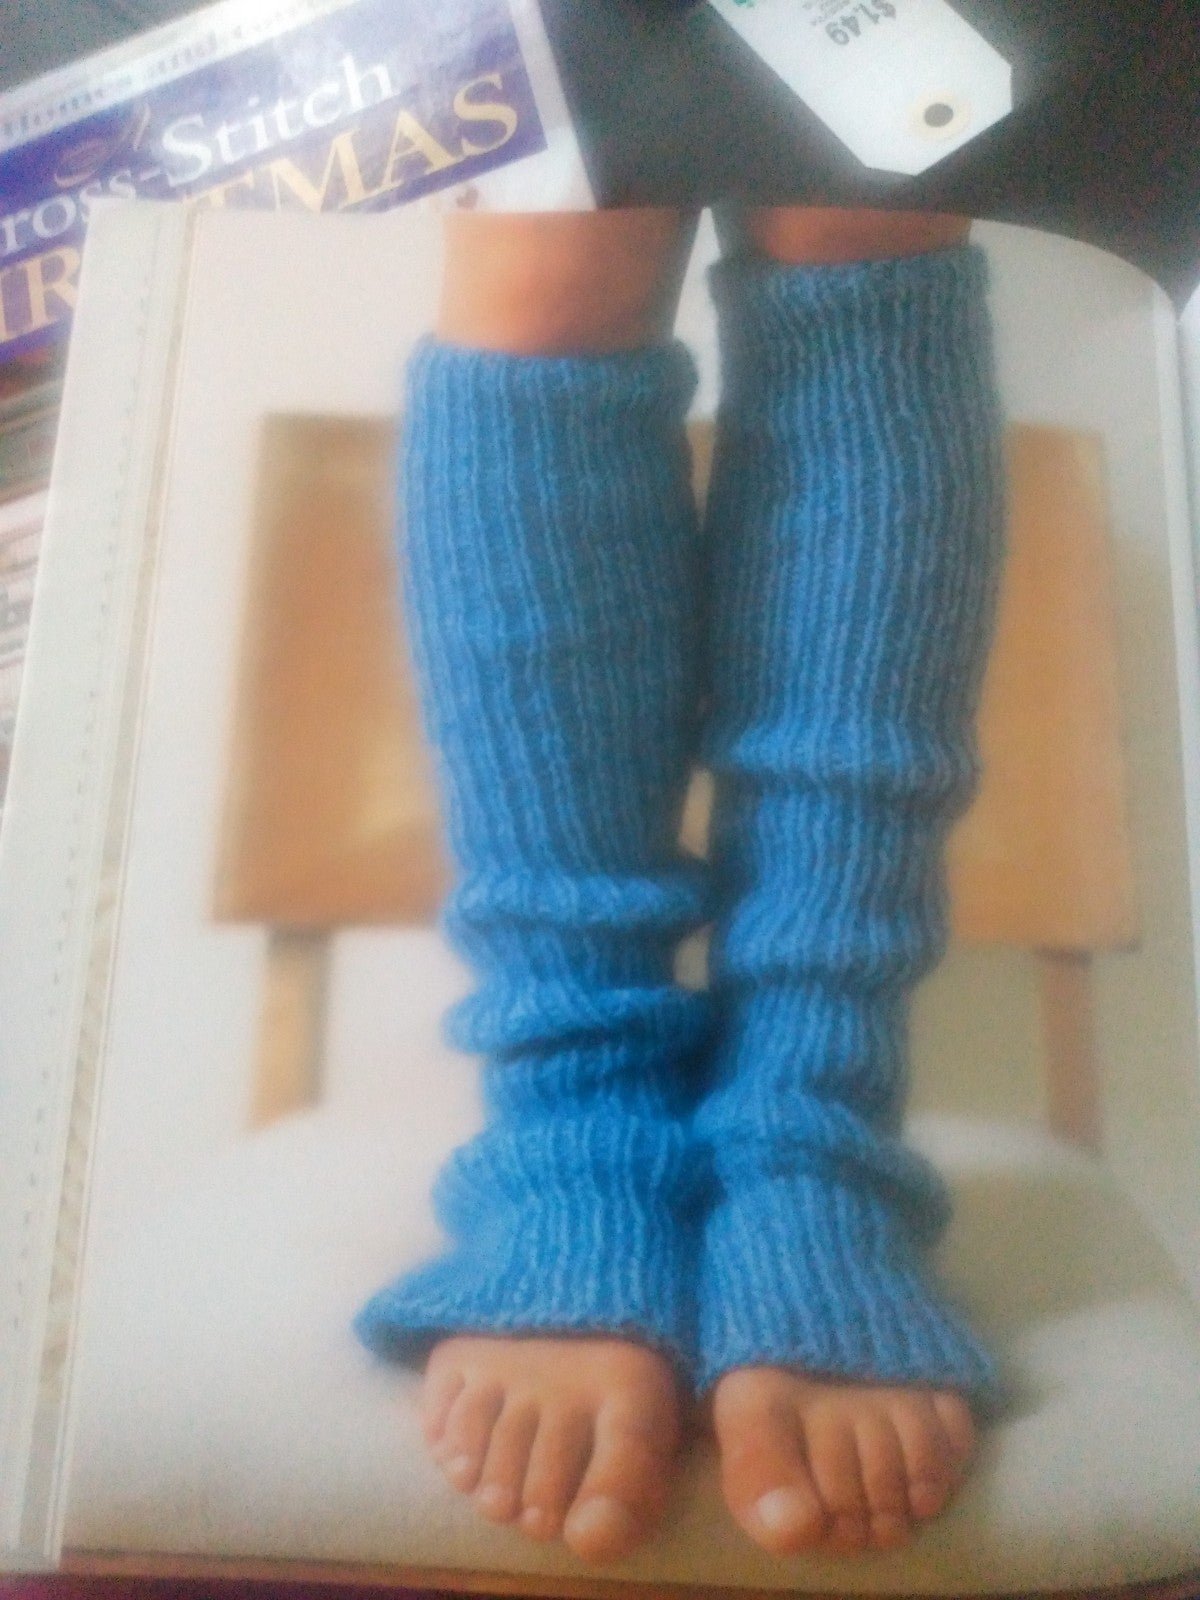 Last Minute Knitted Gifts Pattern Book by Joelle Hoverson 5OV12S4yM